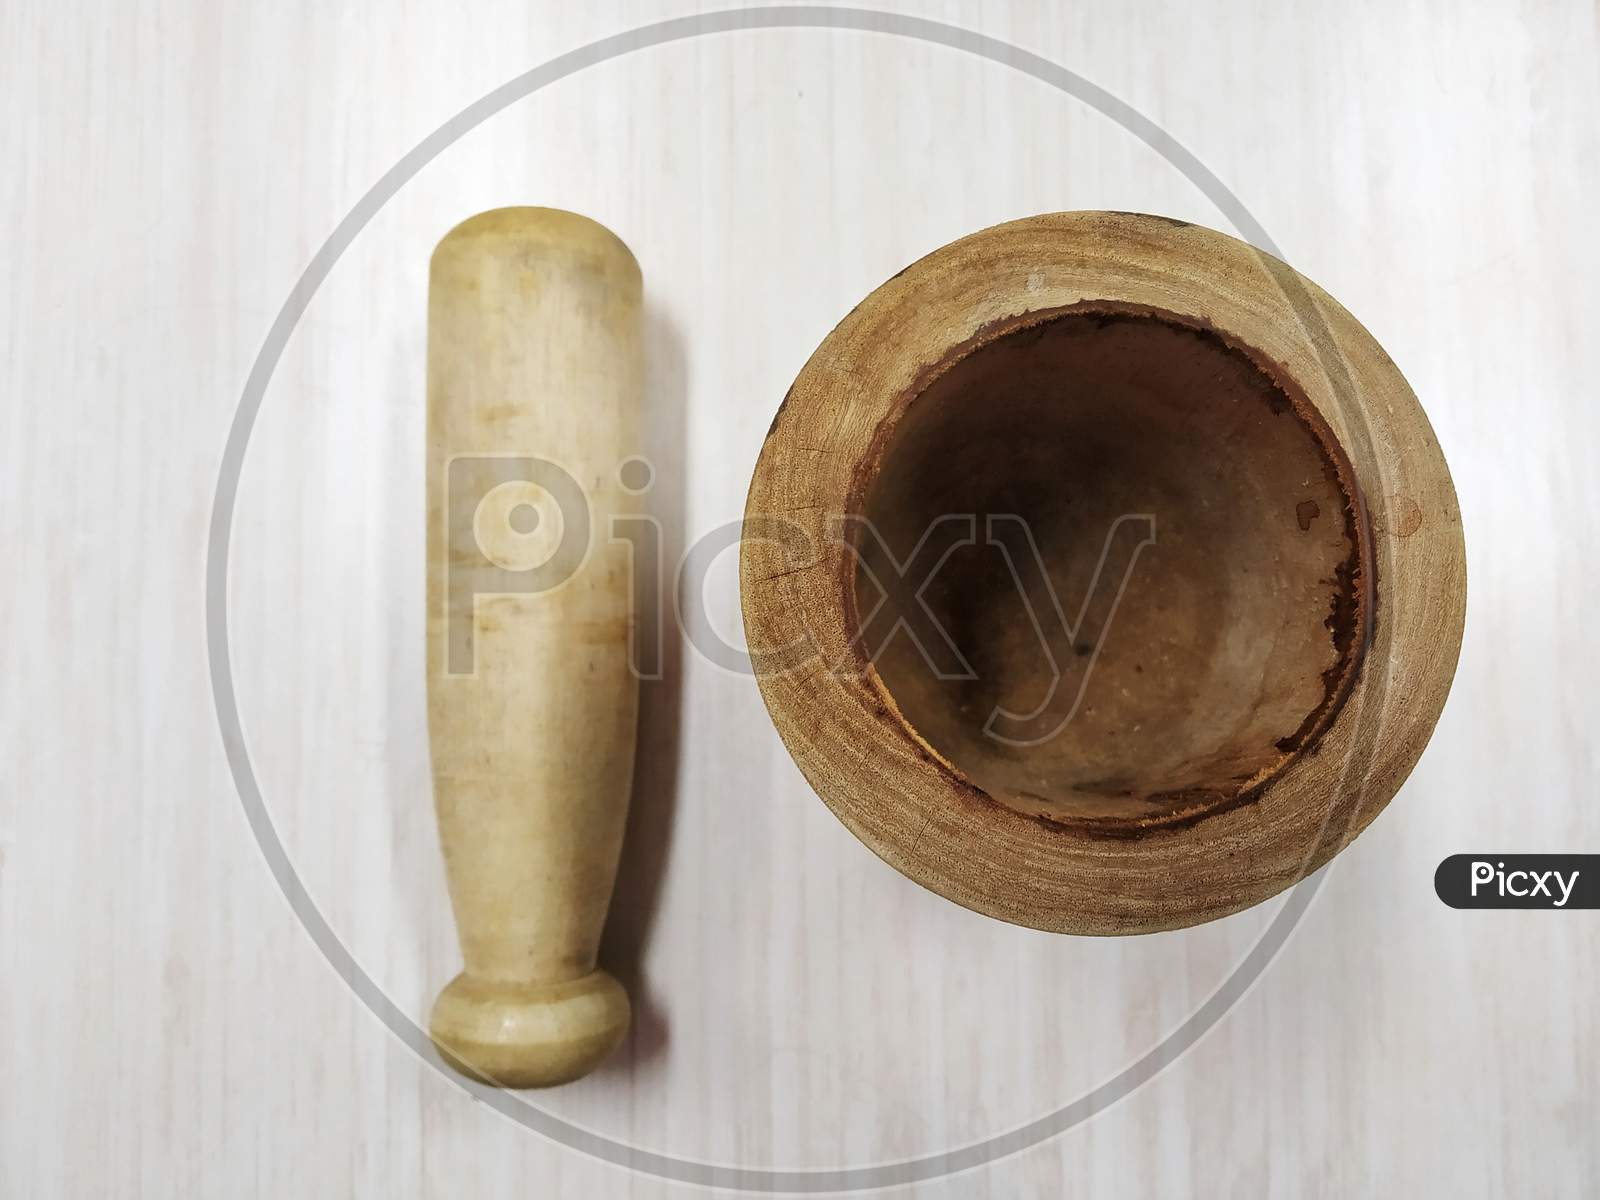 Wooden Mortar And Pestle Set/Khalbatta/ Hamandista With A White Background